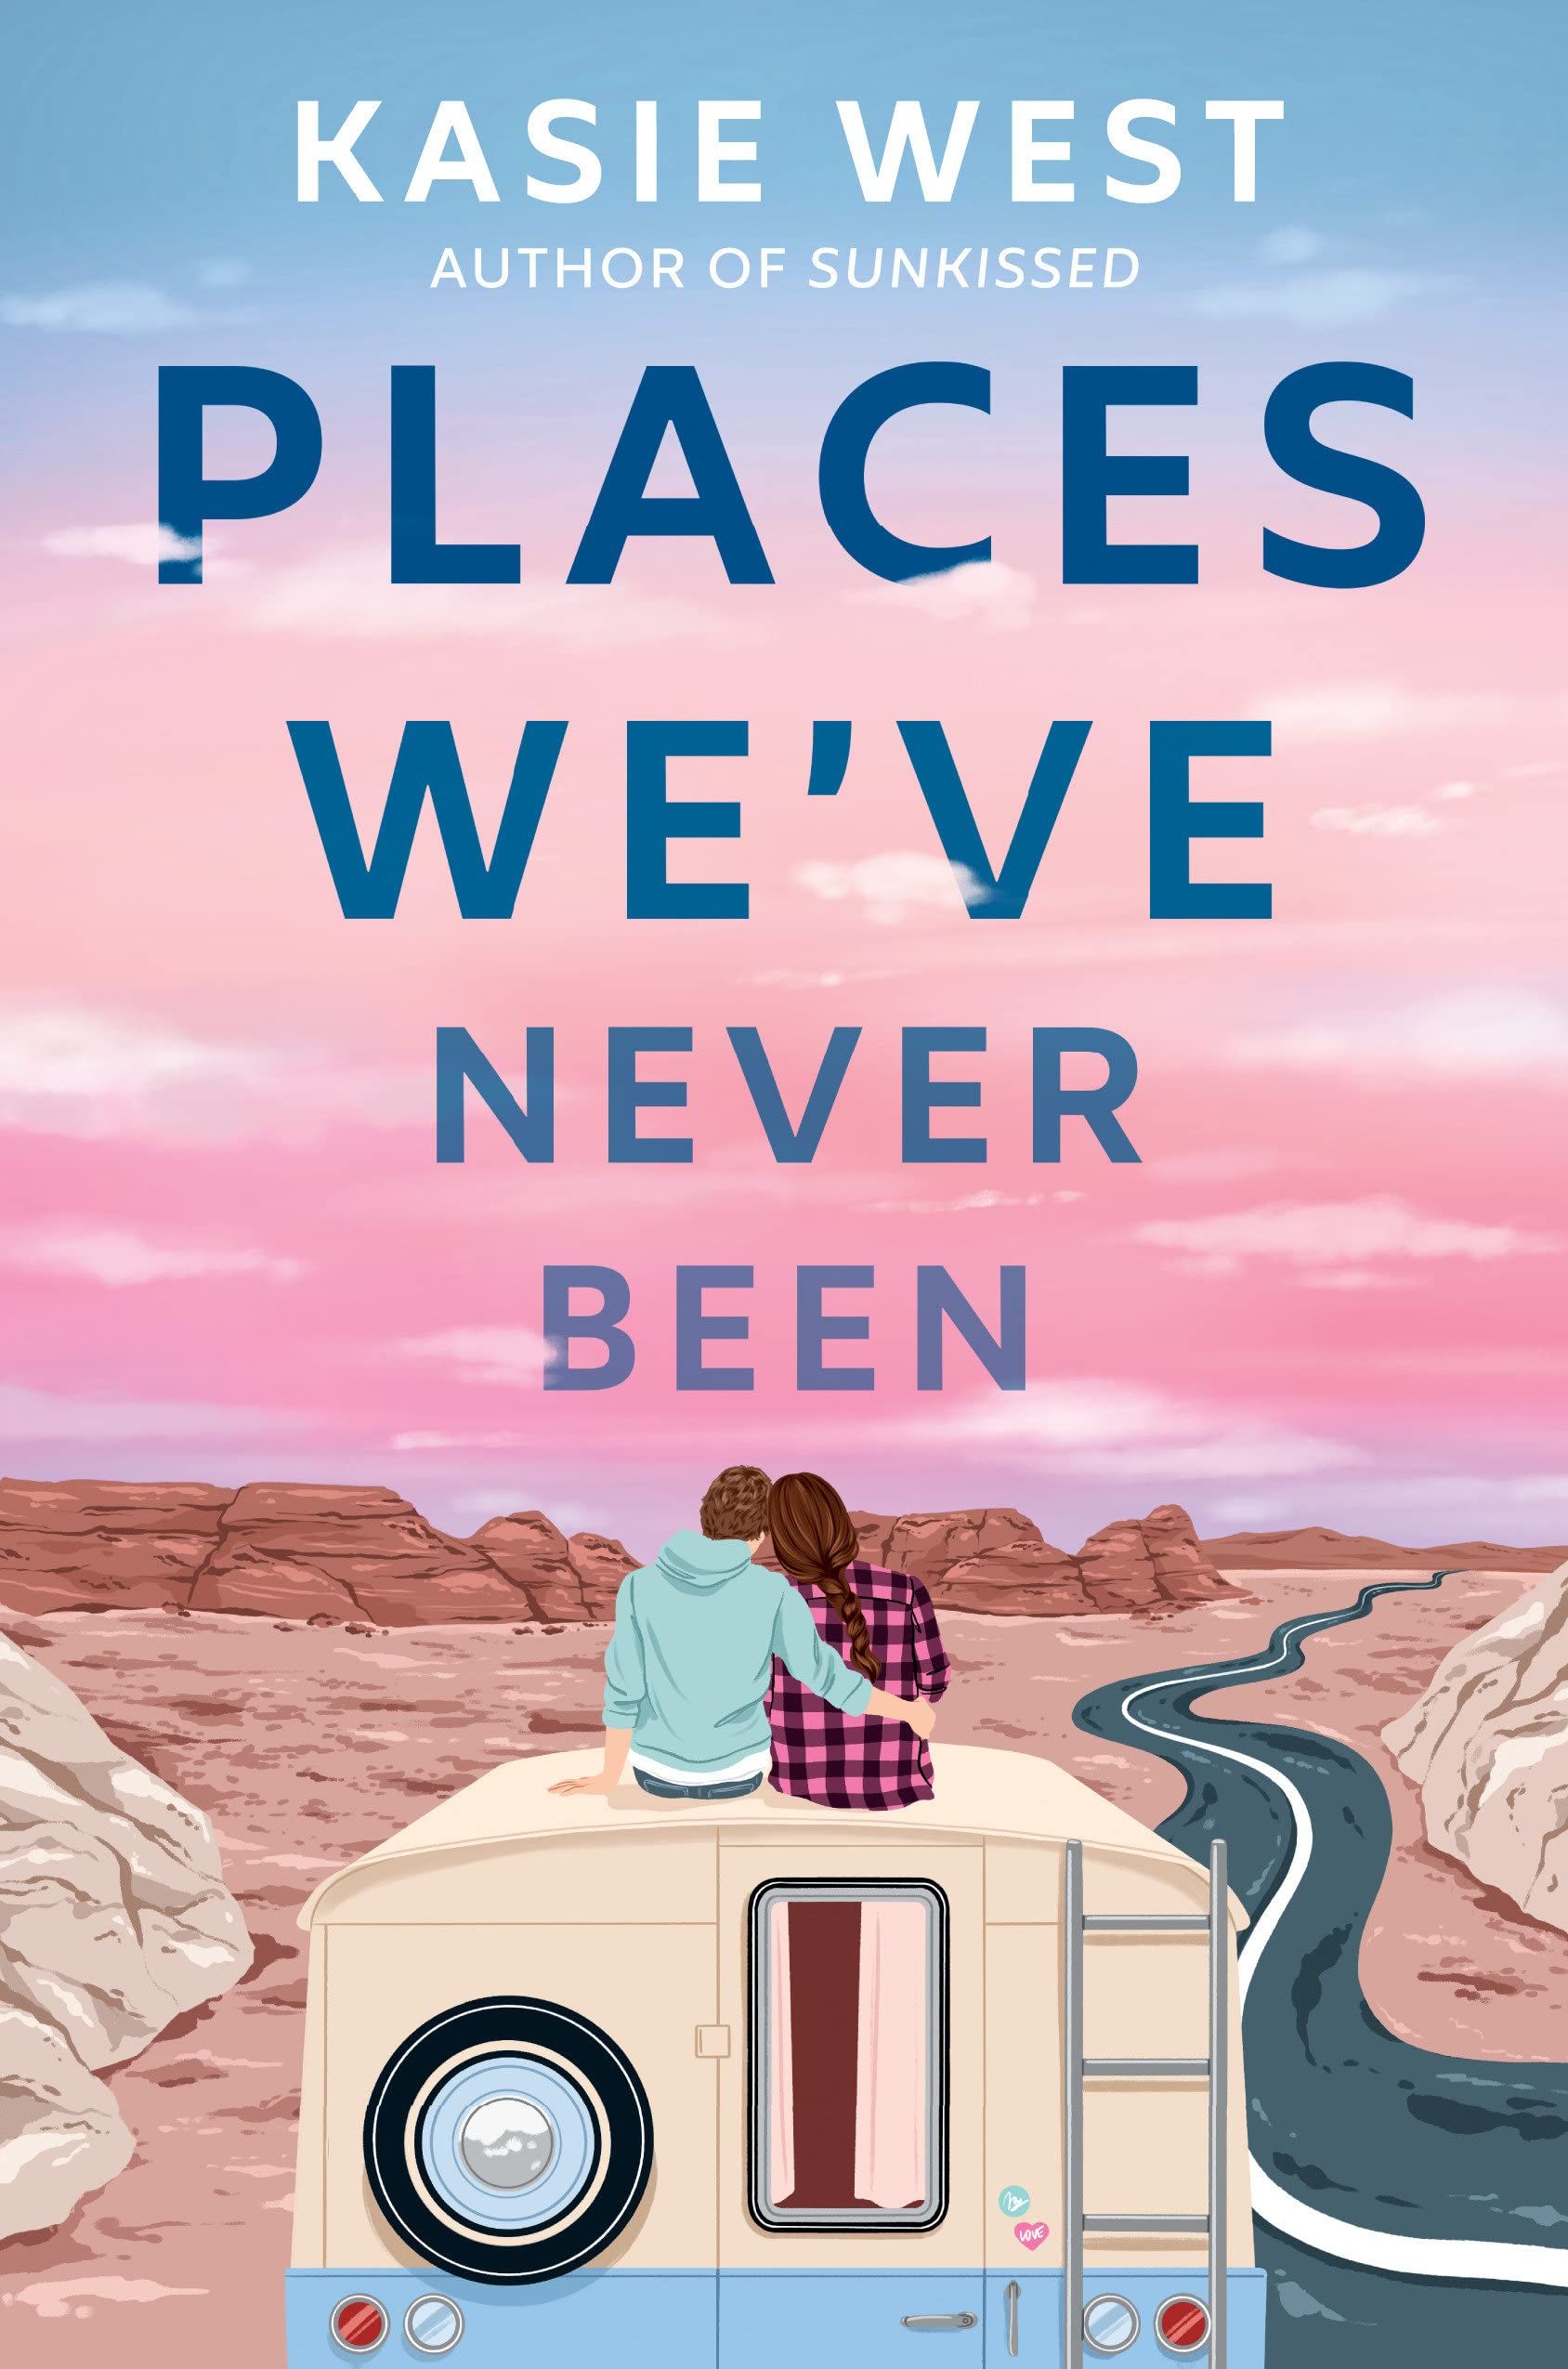 Cover image of "Places We've Never Been" by Kasie West.